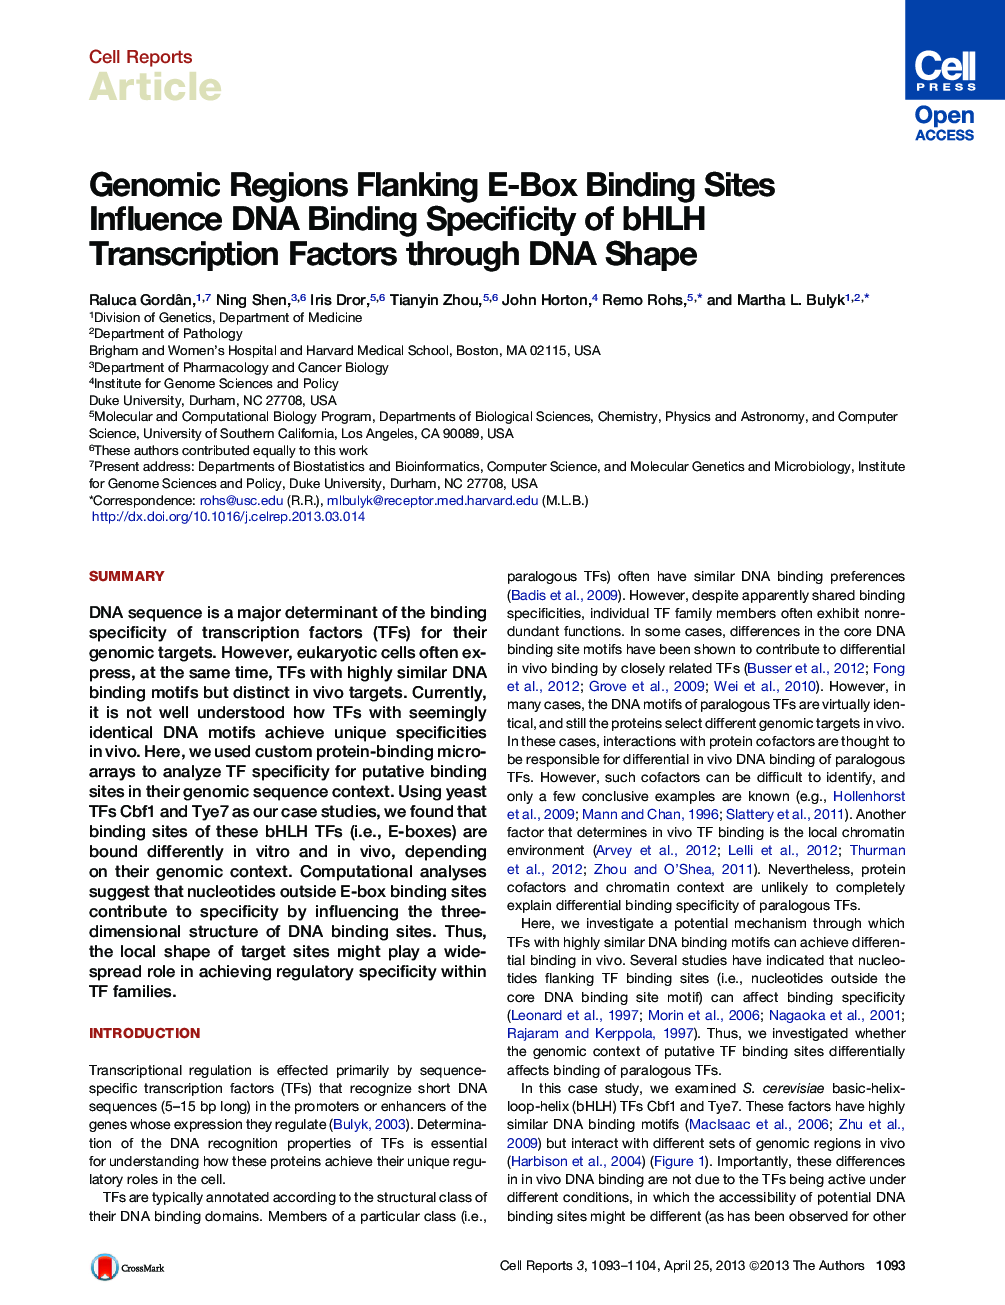 Genomic Regions Flanking E-Box Binding Sites Influence DNA Binding Specificity of bHLH Transcription Factors through DNA Shape